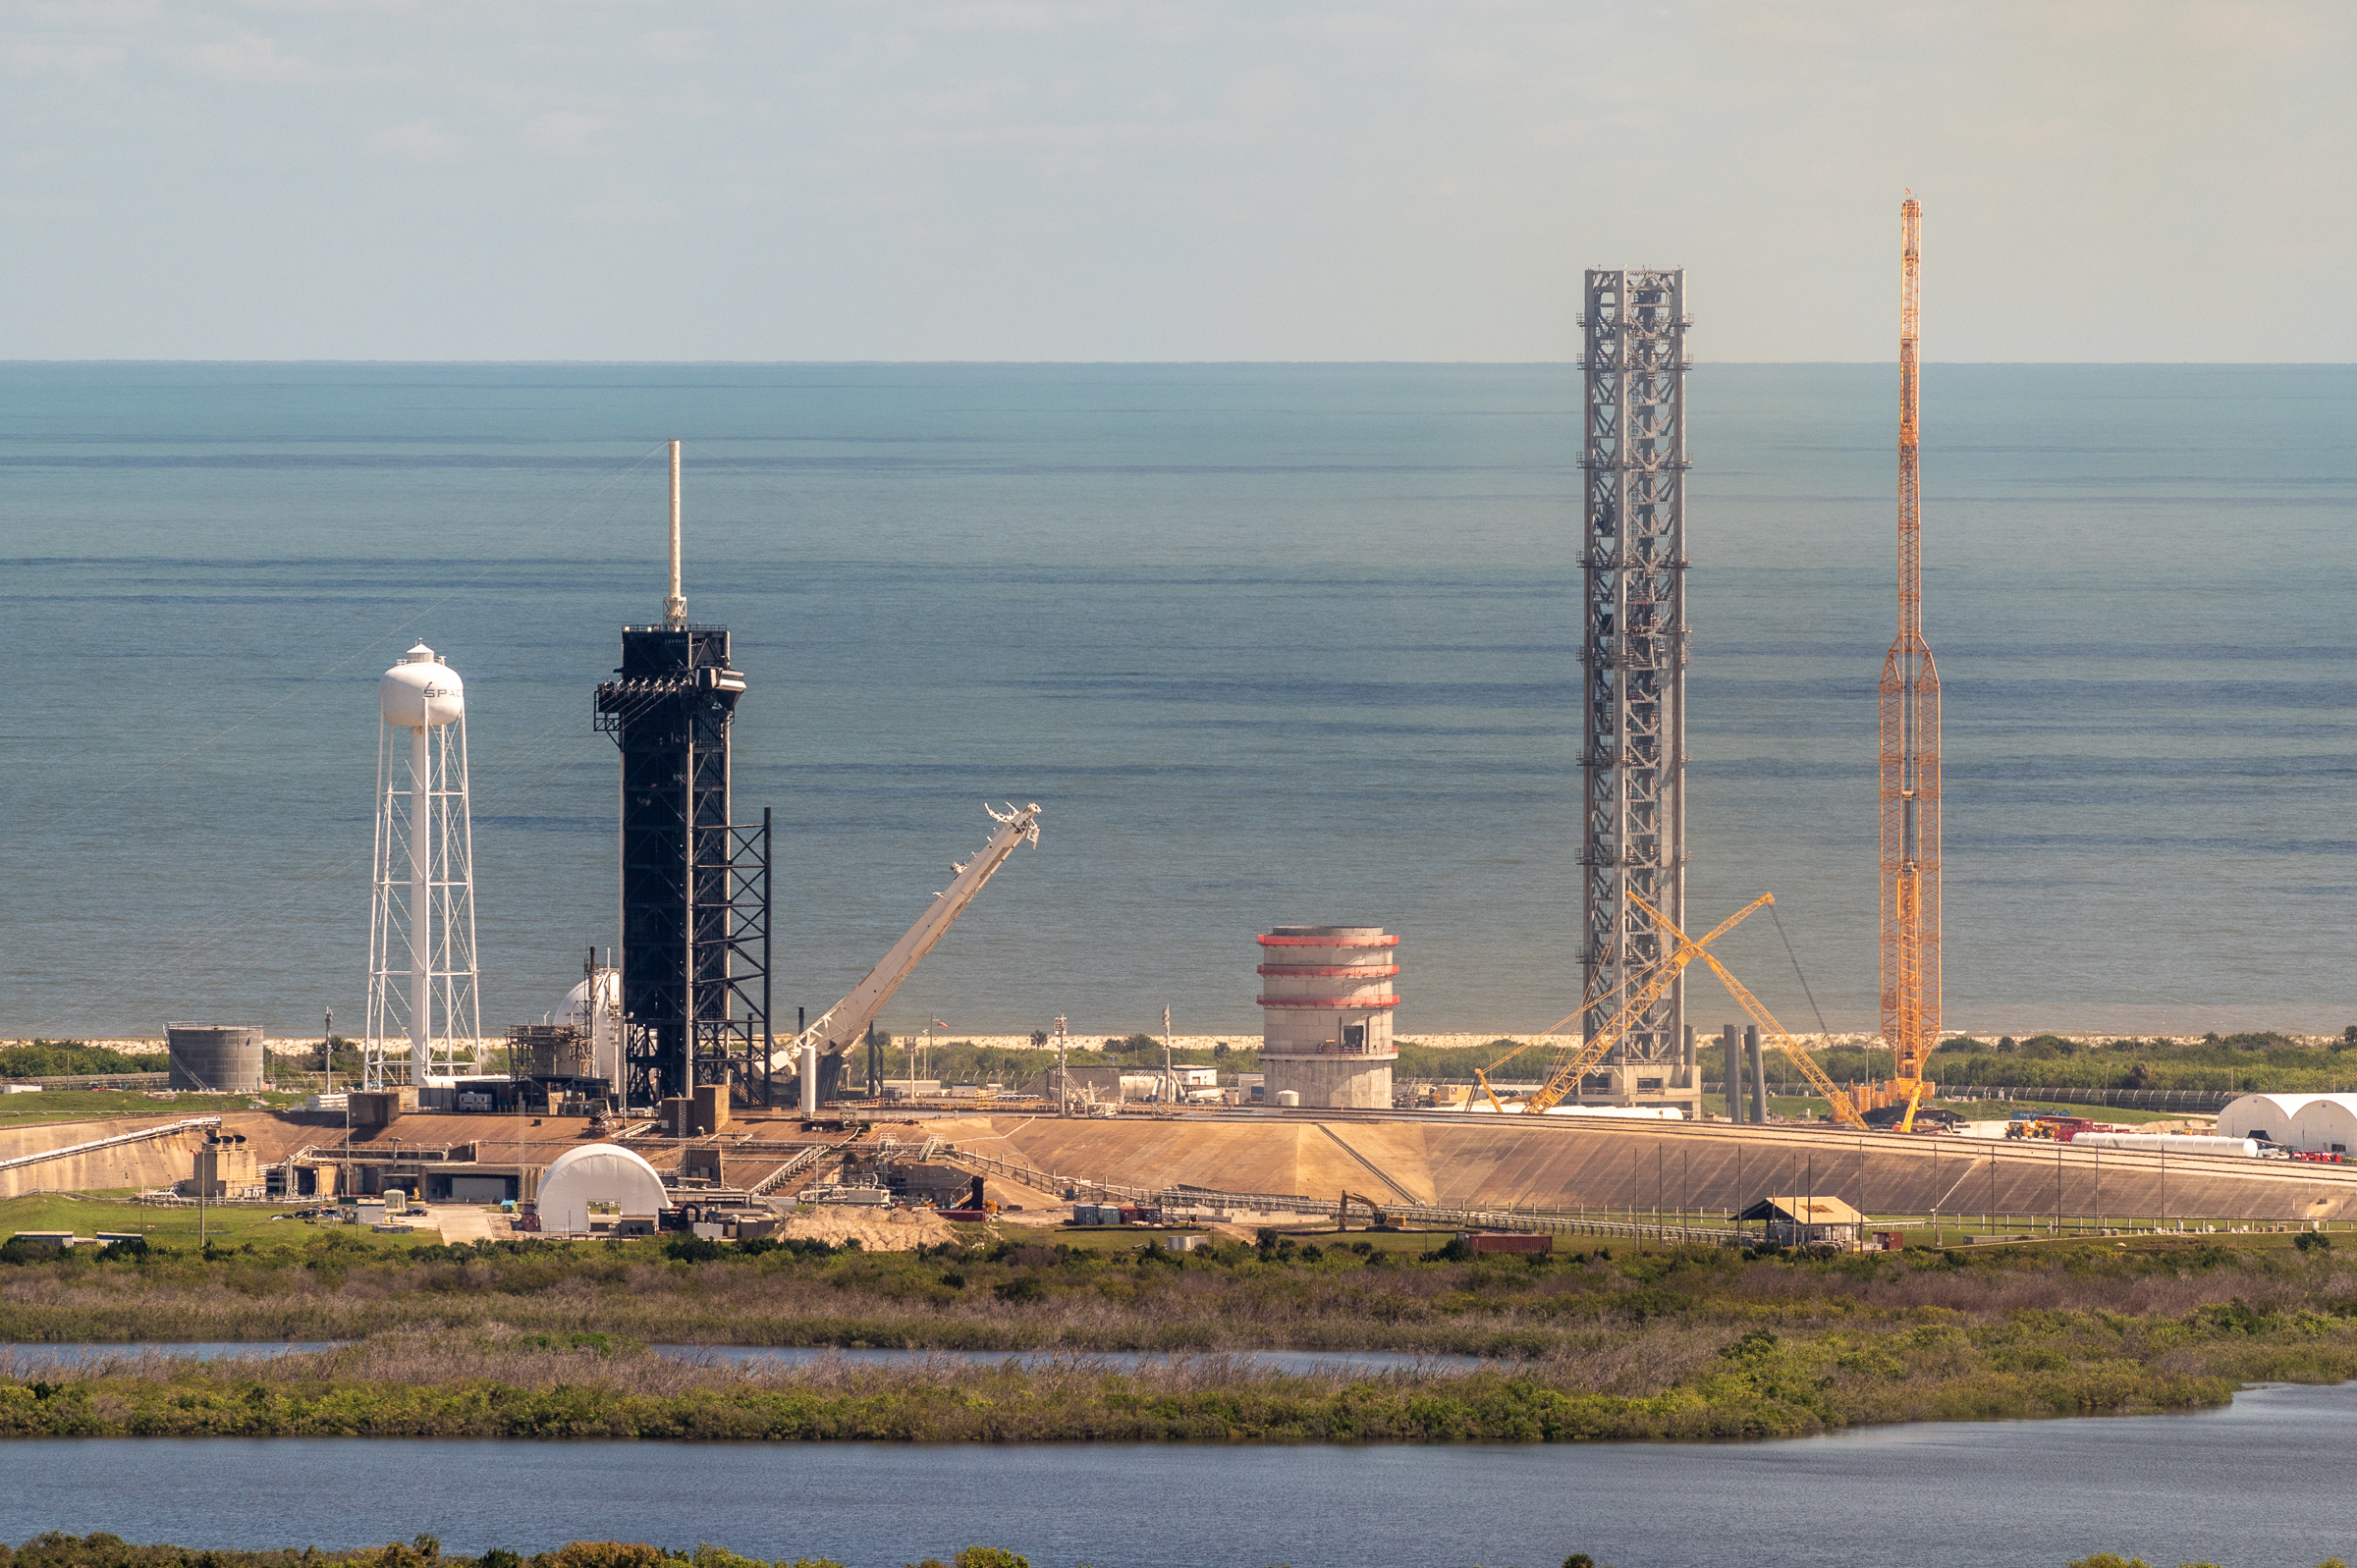 LC-39A after Crew-5 has launched. Strongback is halfway down from launch and the massive Starship tower and cranes for construction are in view.